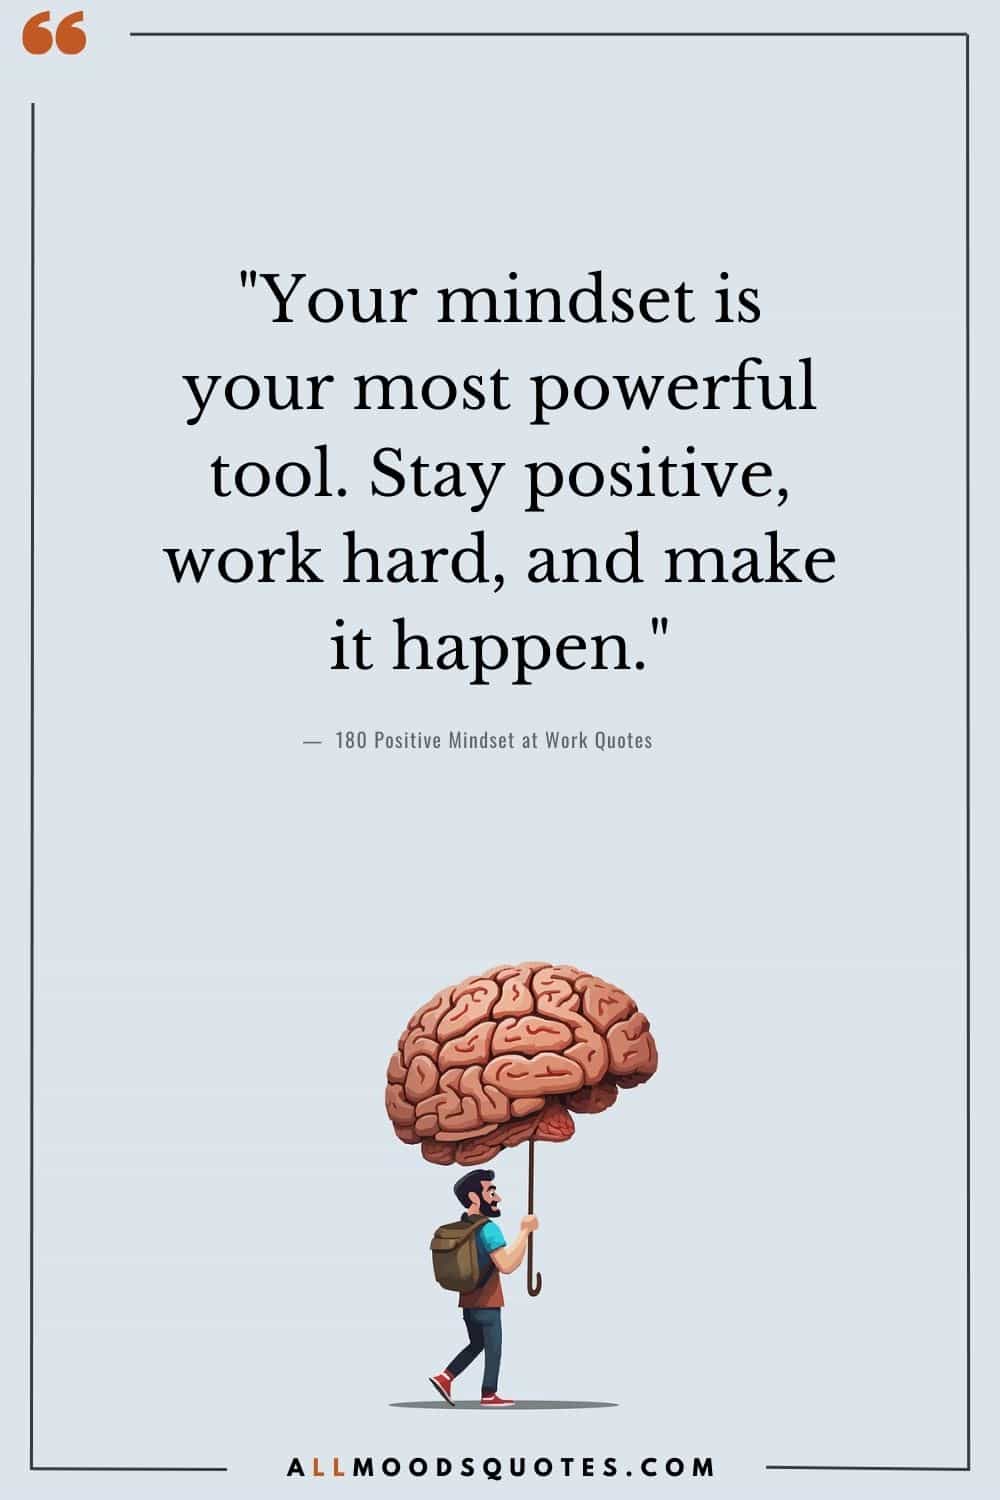 "Your mindset is your most powerful tool. Stay positive, work hard, and make it happen." - Unknown